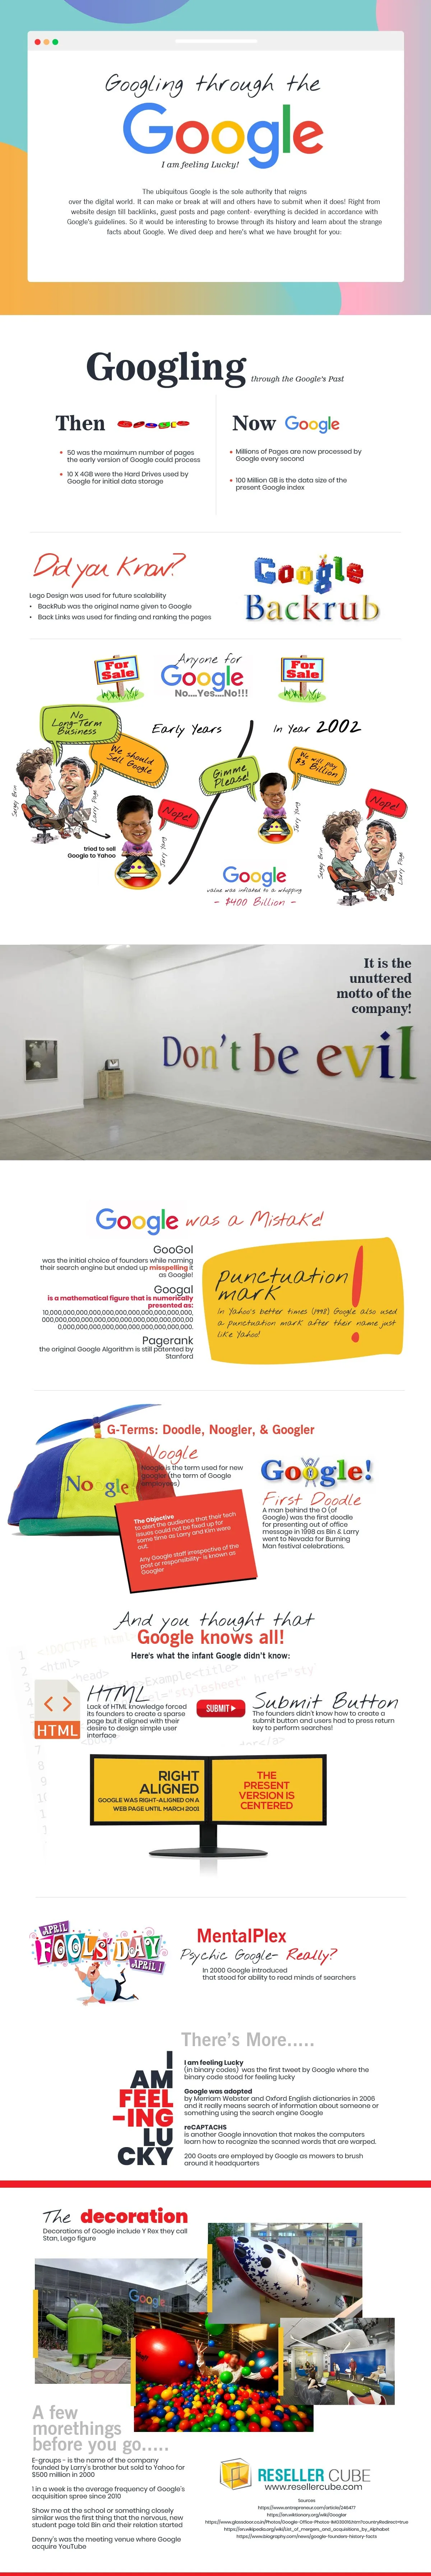 A short history of Google #INFOGRAPHIC